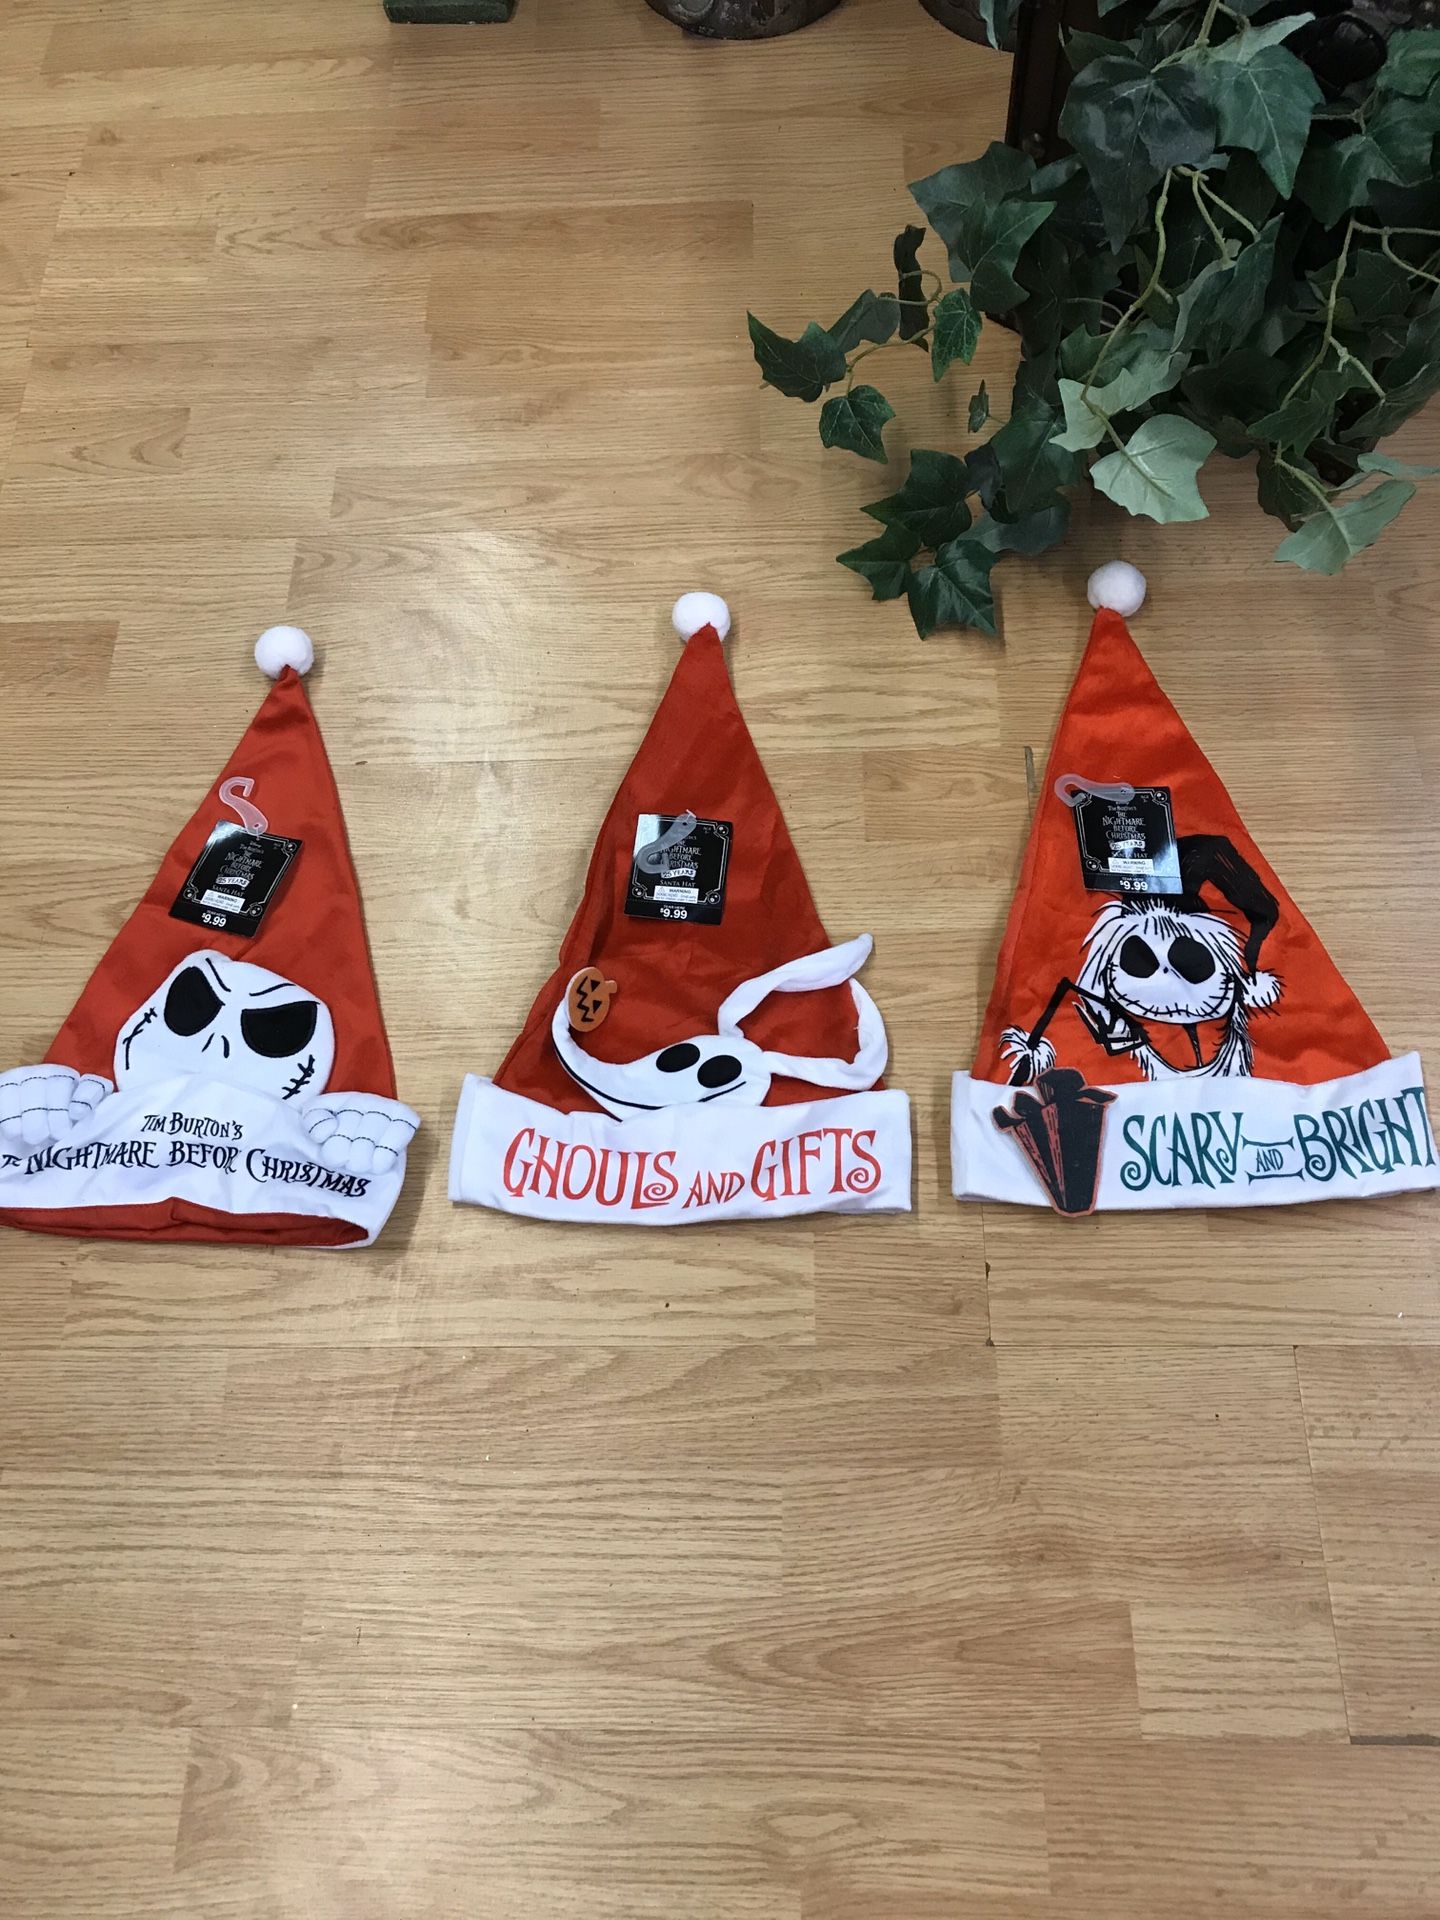 3 The nightmare before Christmas hats “NEW “